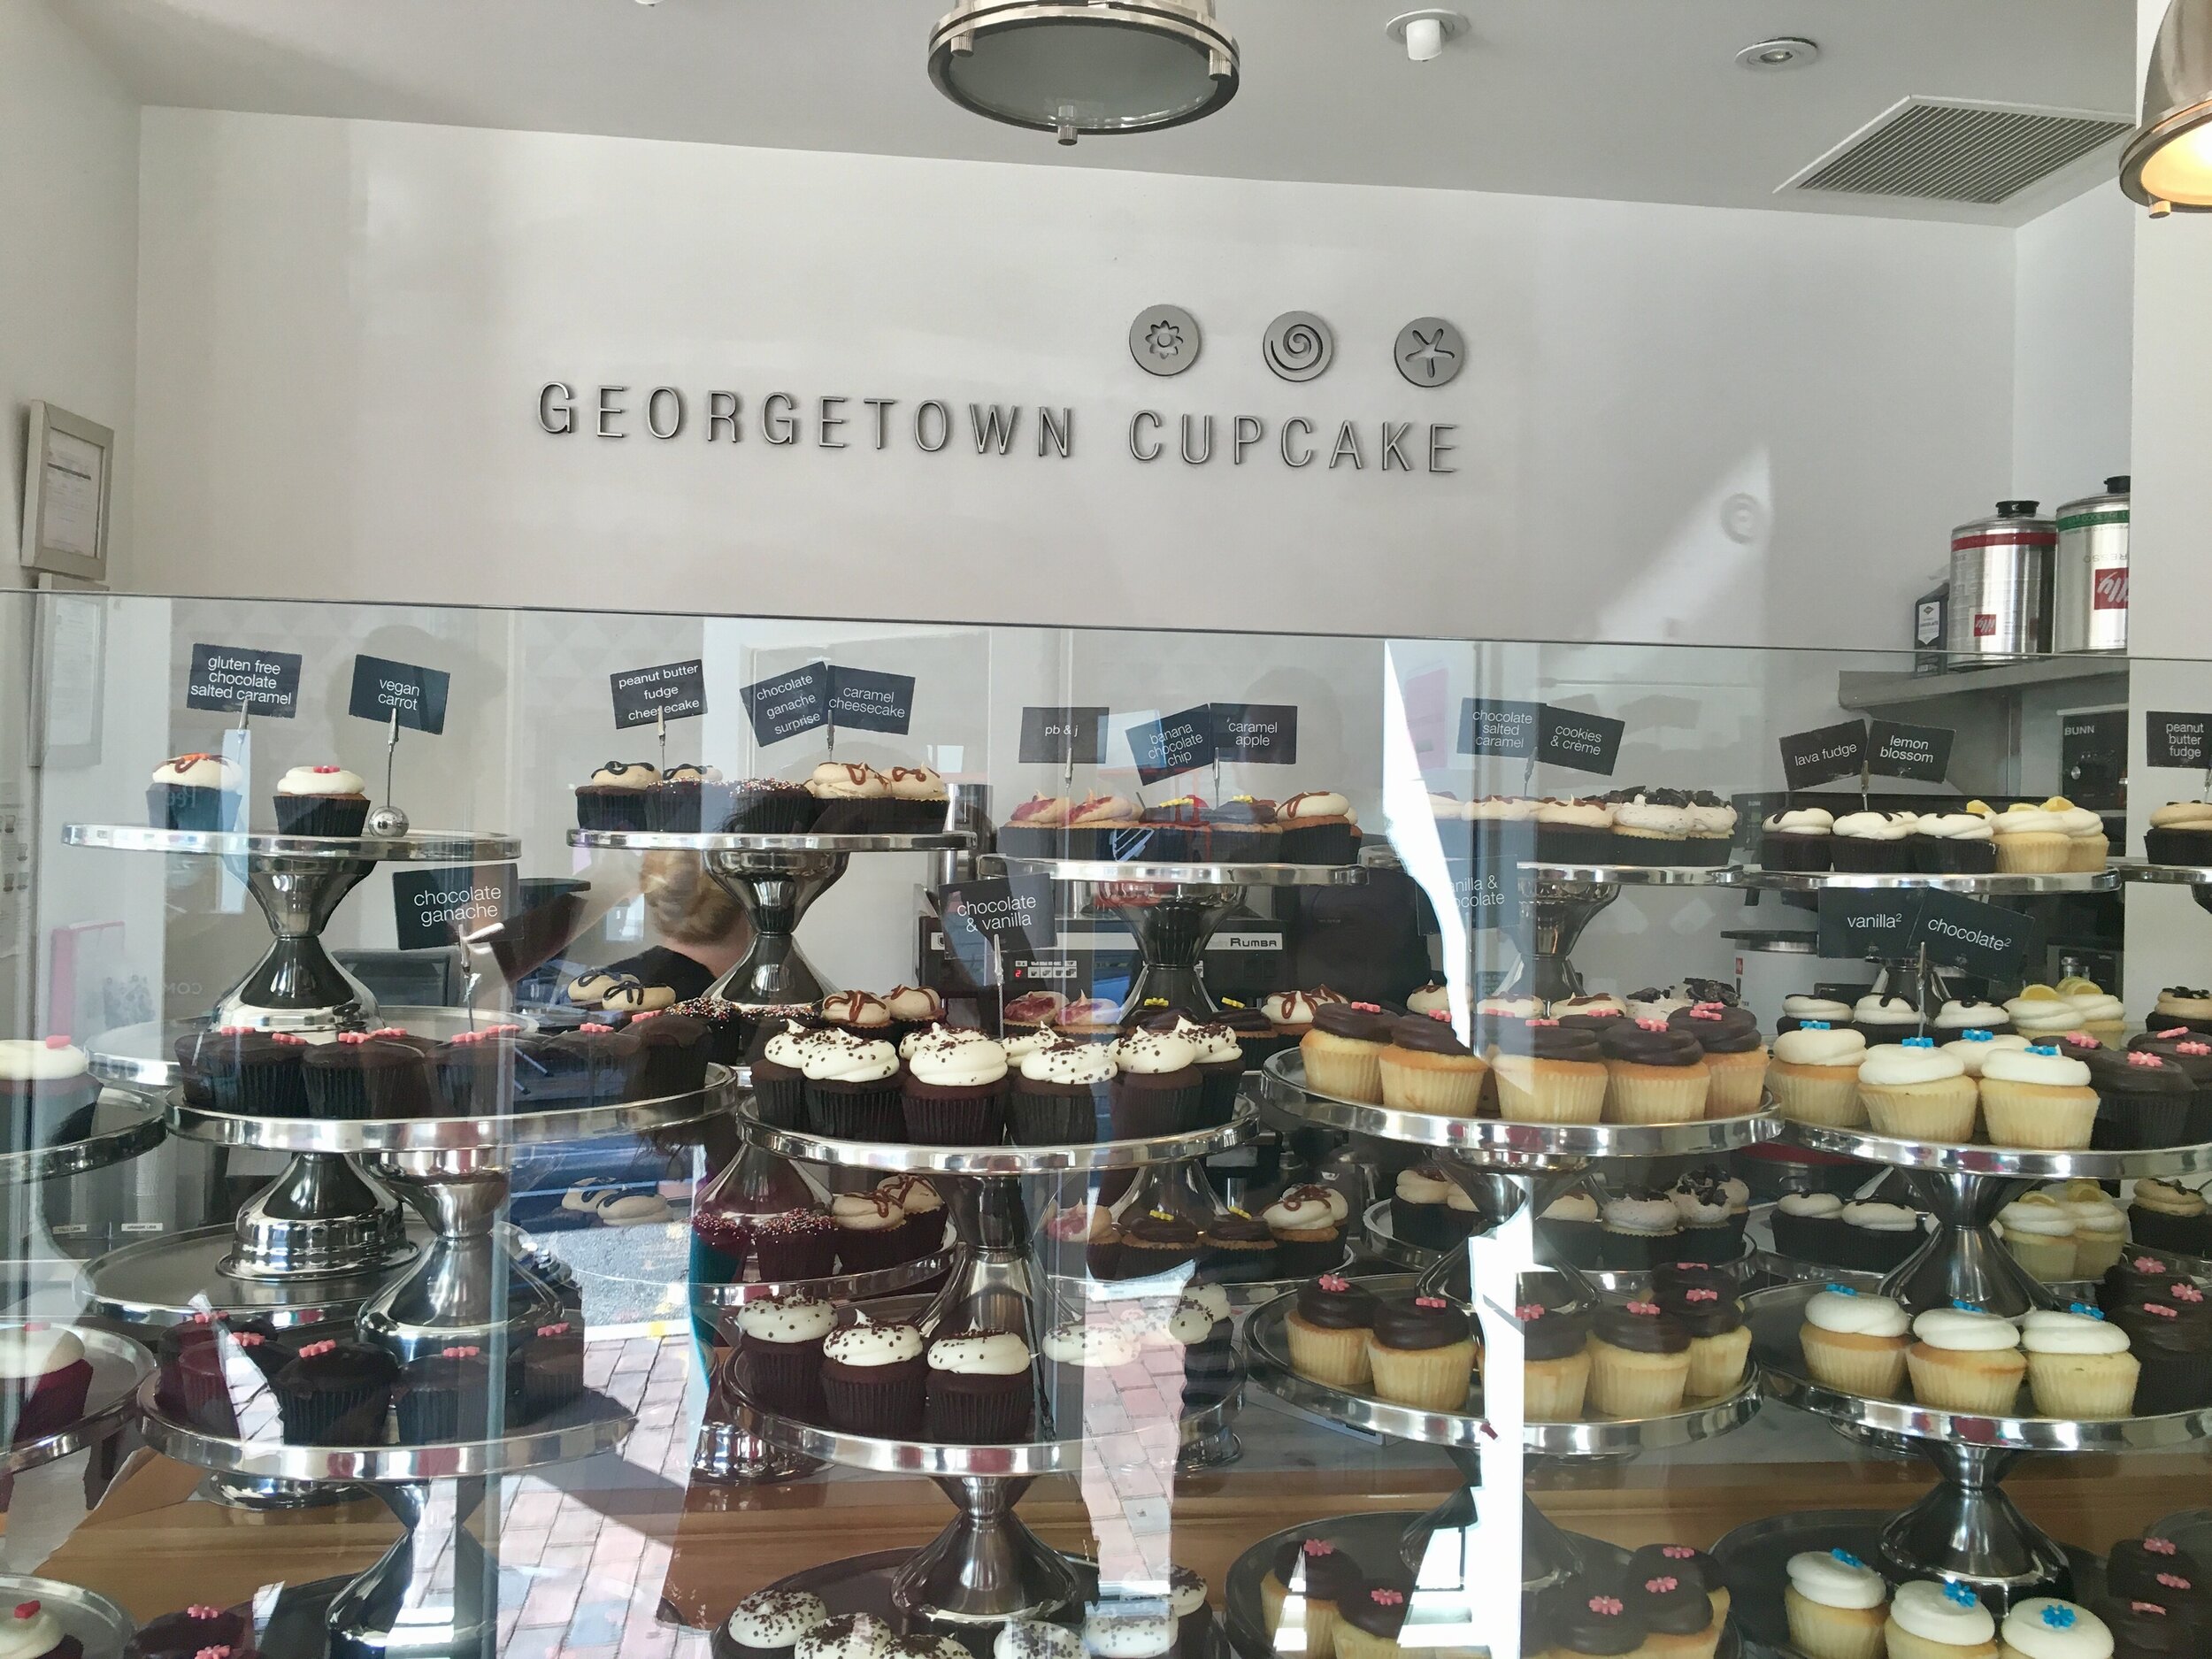 Washington DC Travel Guide - Georgetown cupcakes a must